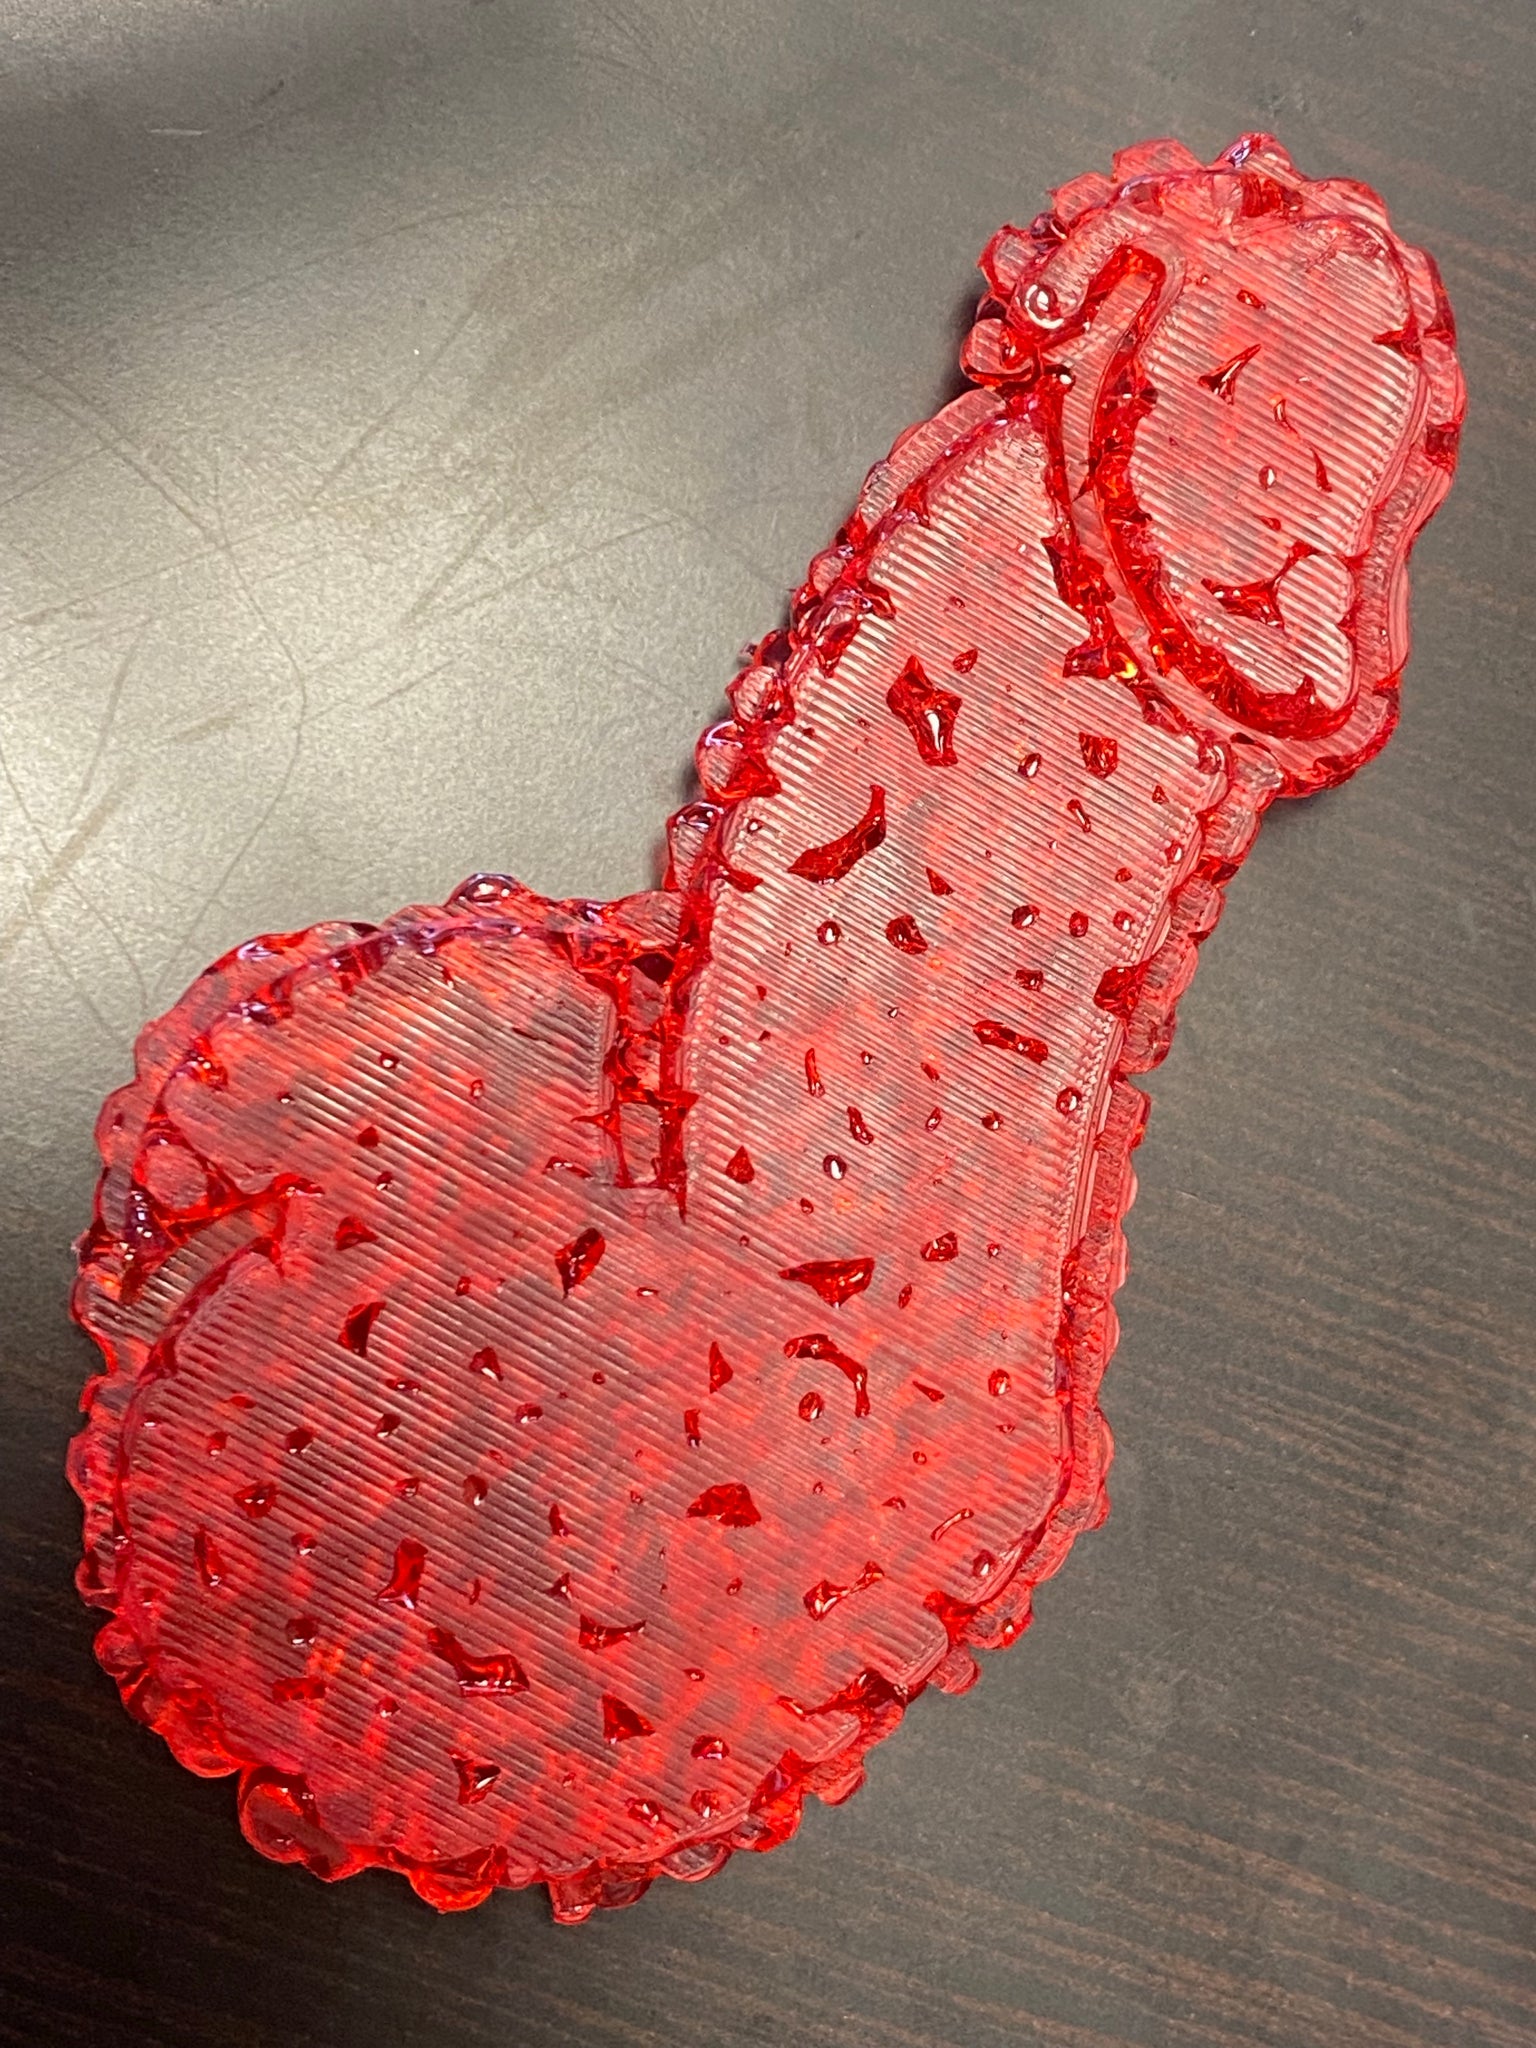 penis mold To Bake Your Fantasy 